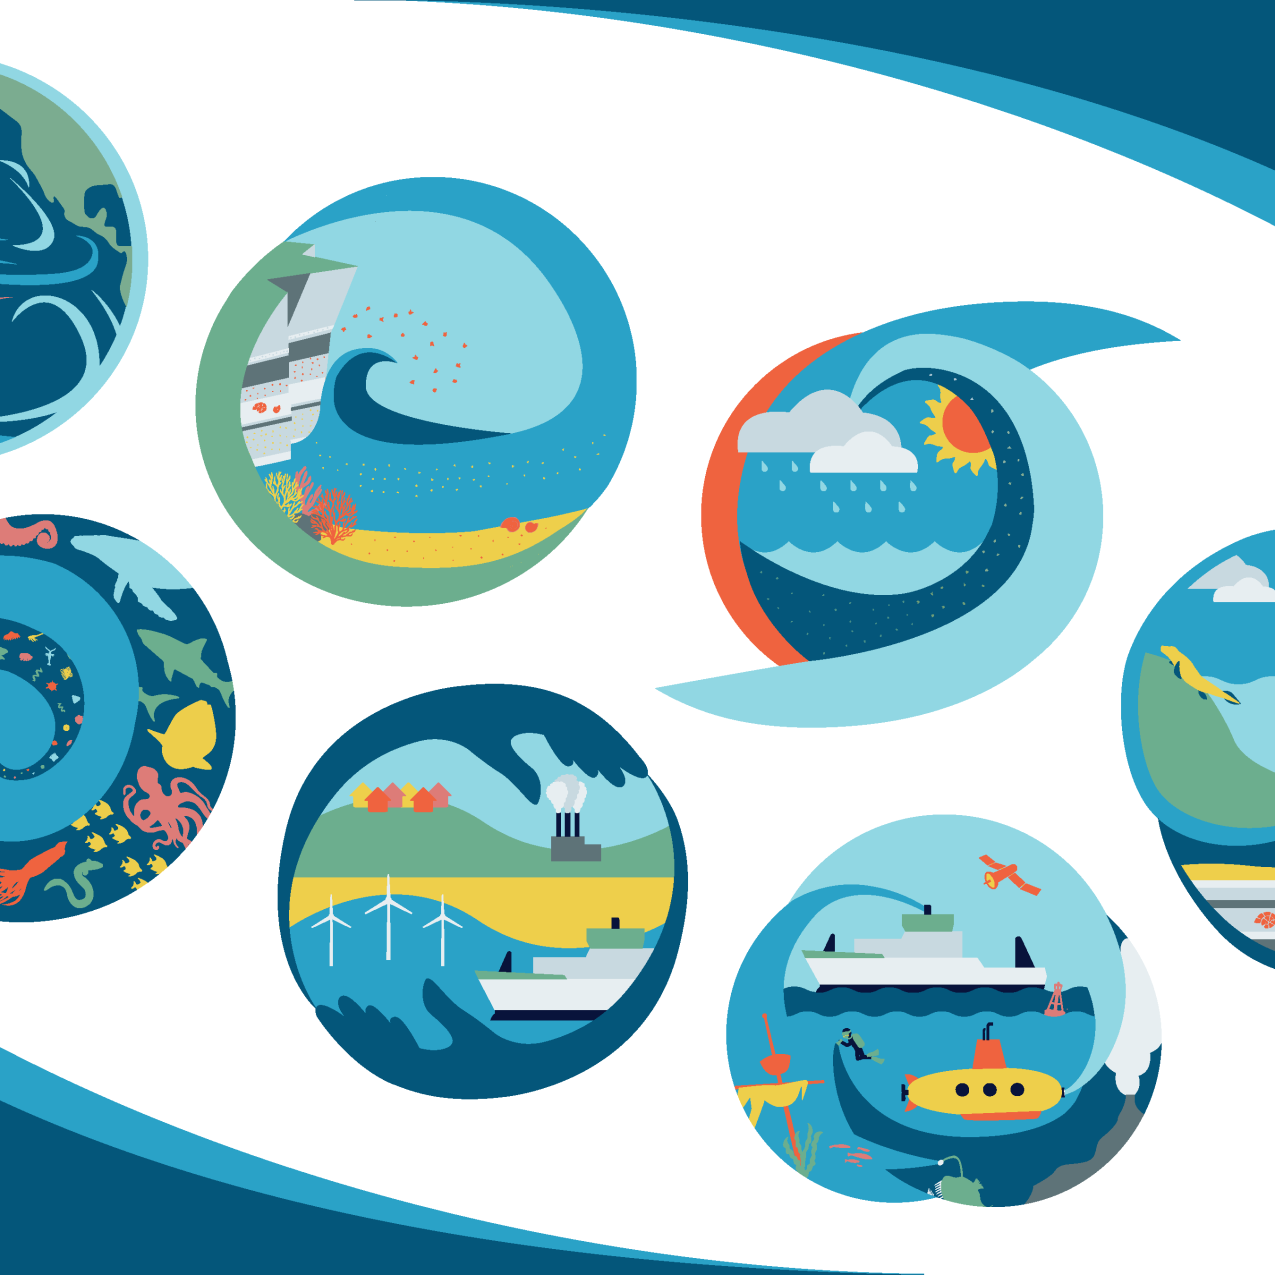 Seven circular graphics that illustrate important oceanic topics and properties. Graphics showcase ocean currents, erosion, weather patterns, evolution, diverse marine life, human impacts, and exploration.